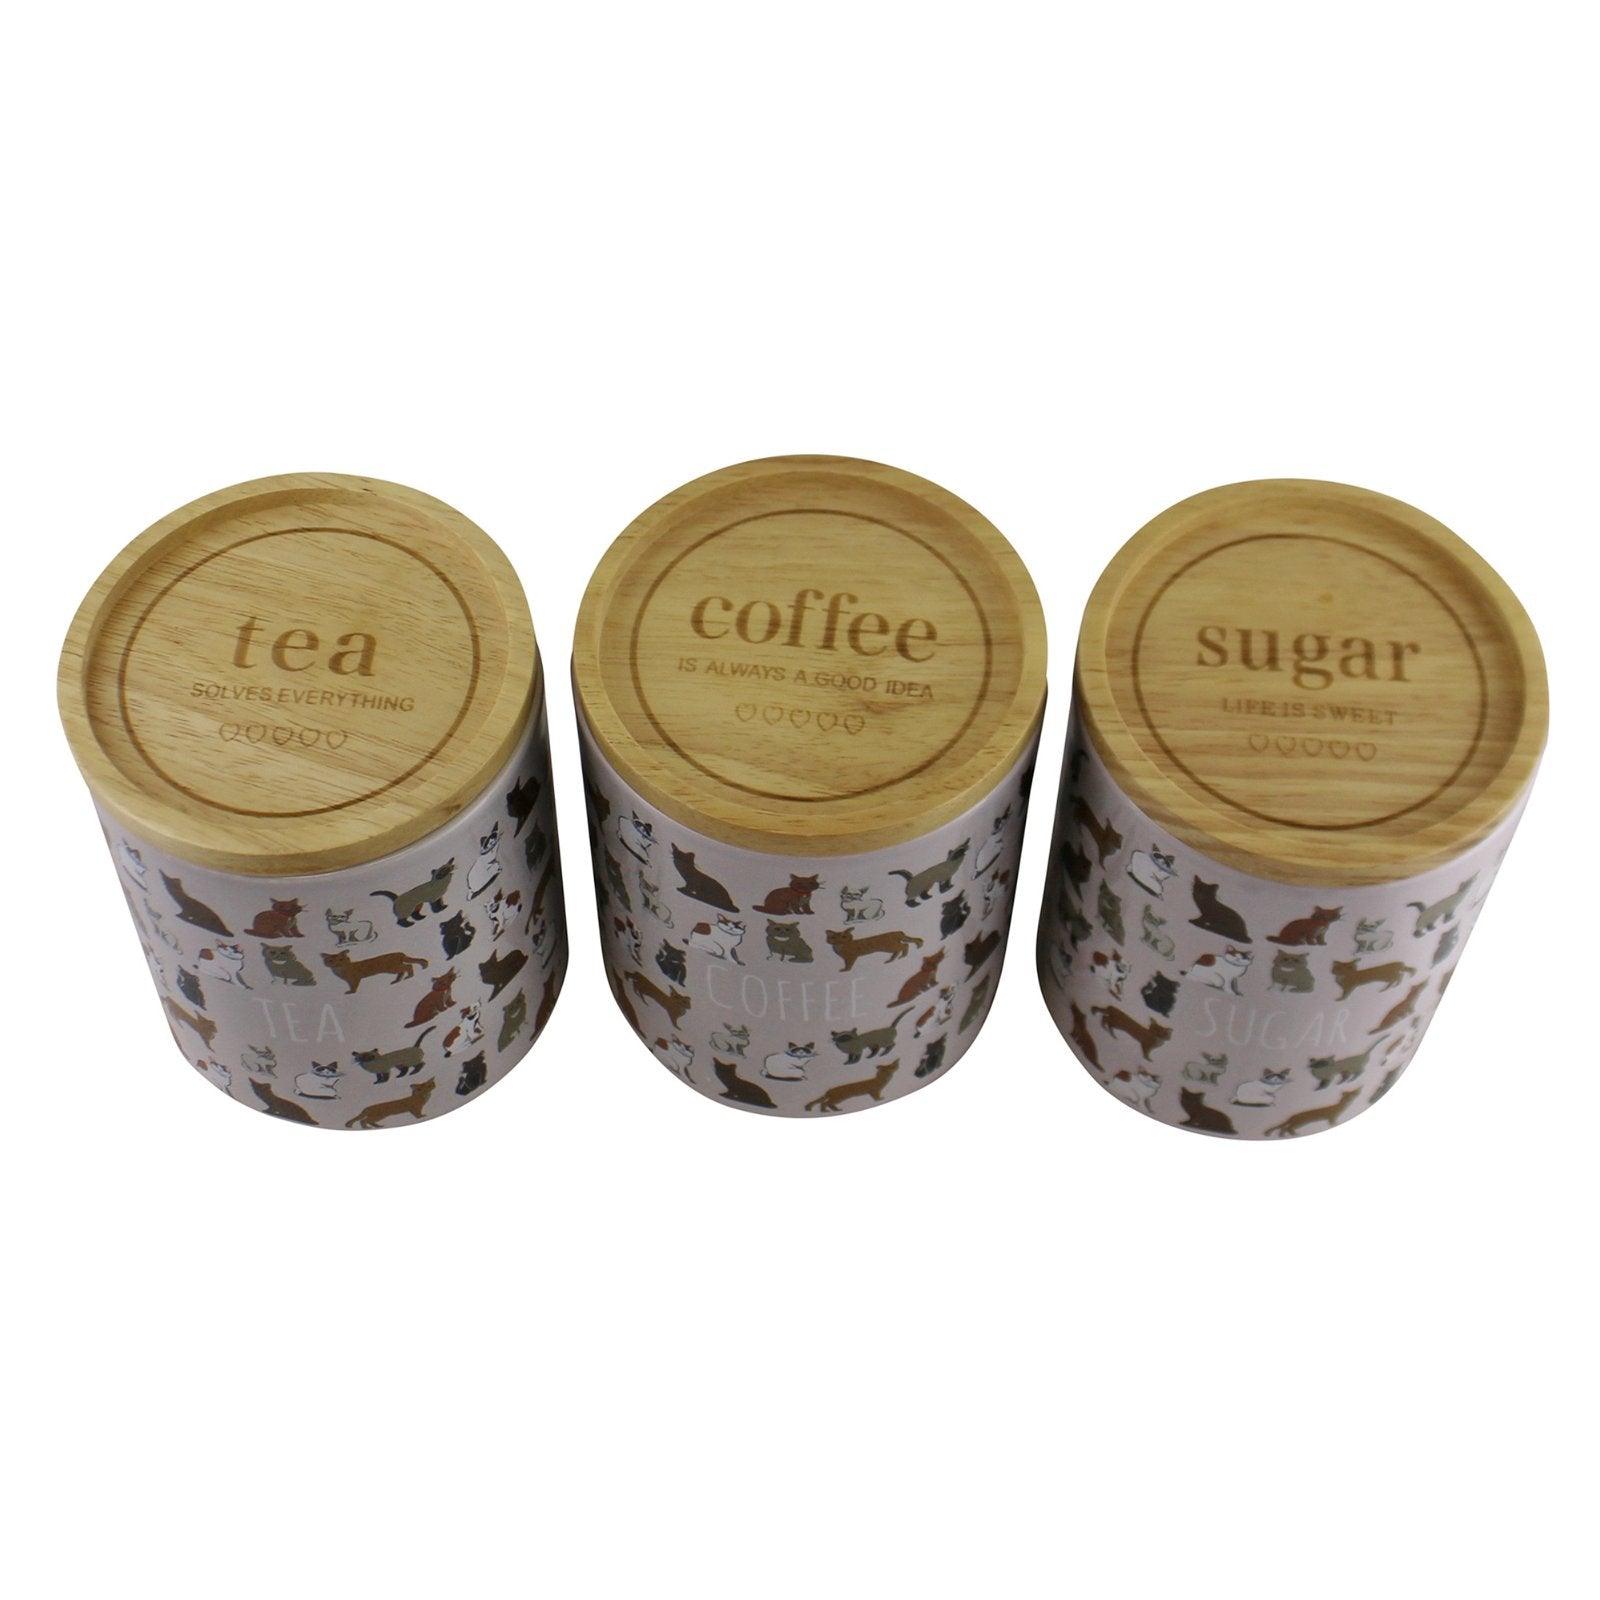 View Ceramic Cat Design TeaCoffee Sugar Canisters information